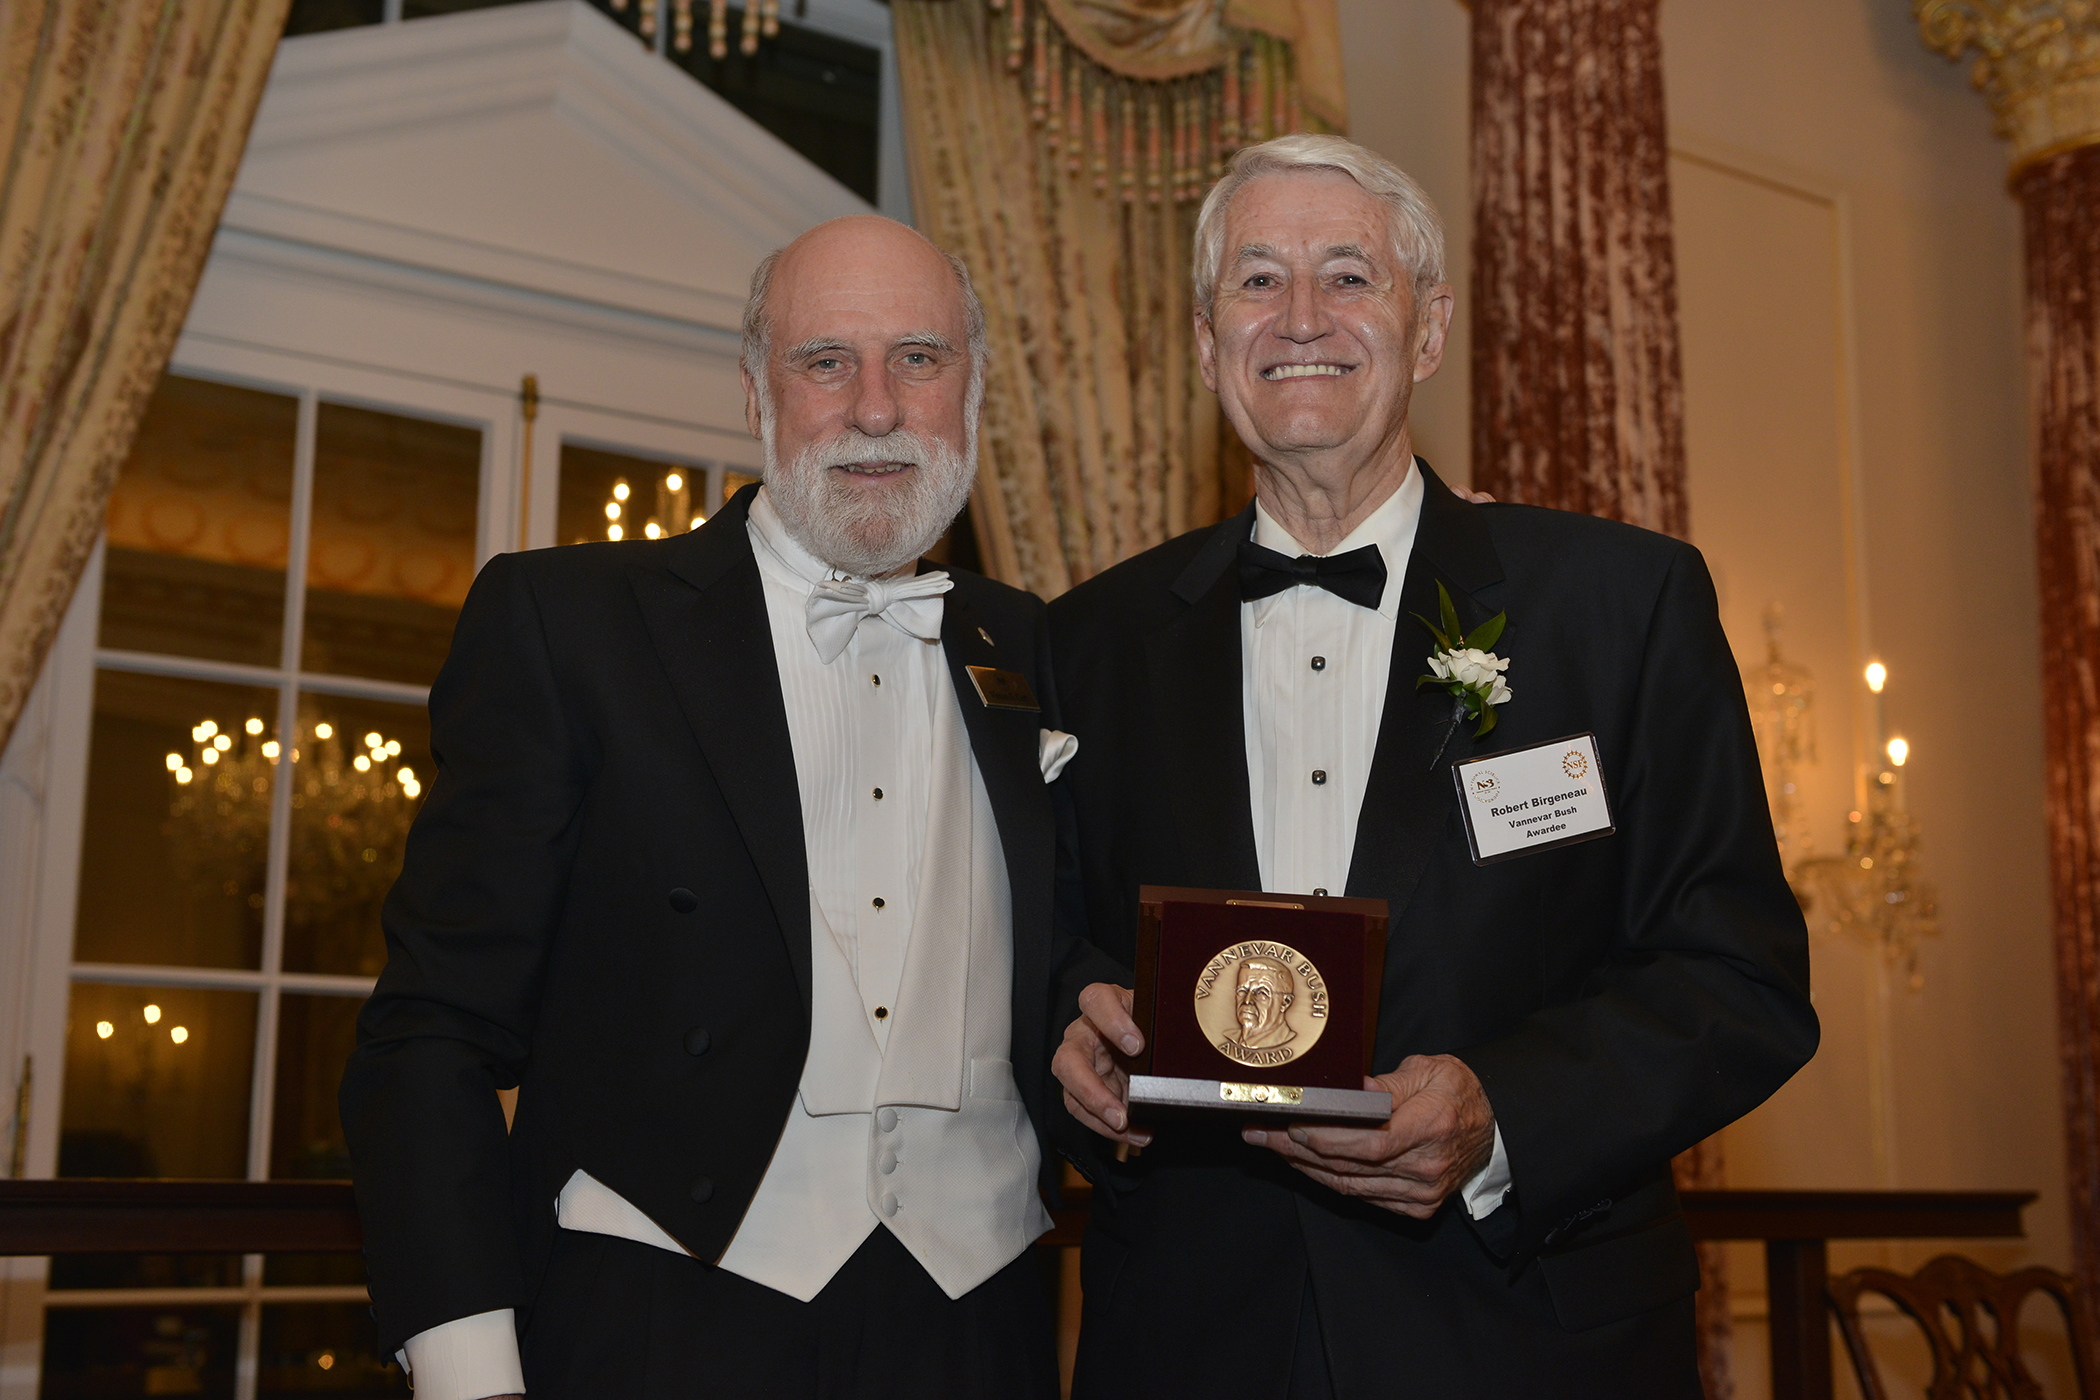 Image of Birgeneau and Cerf with Award Metal